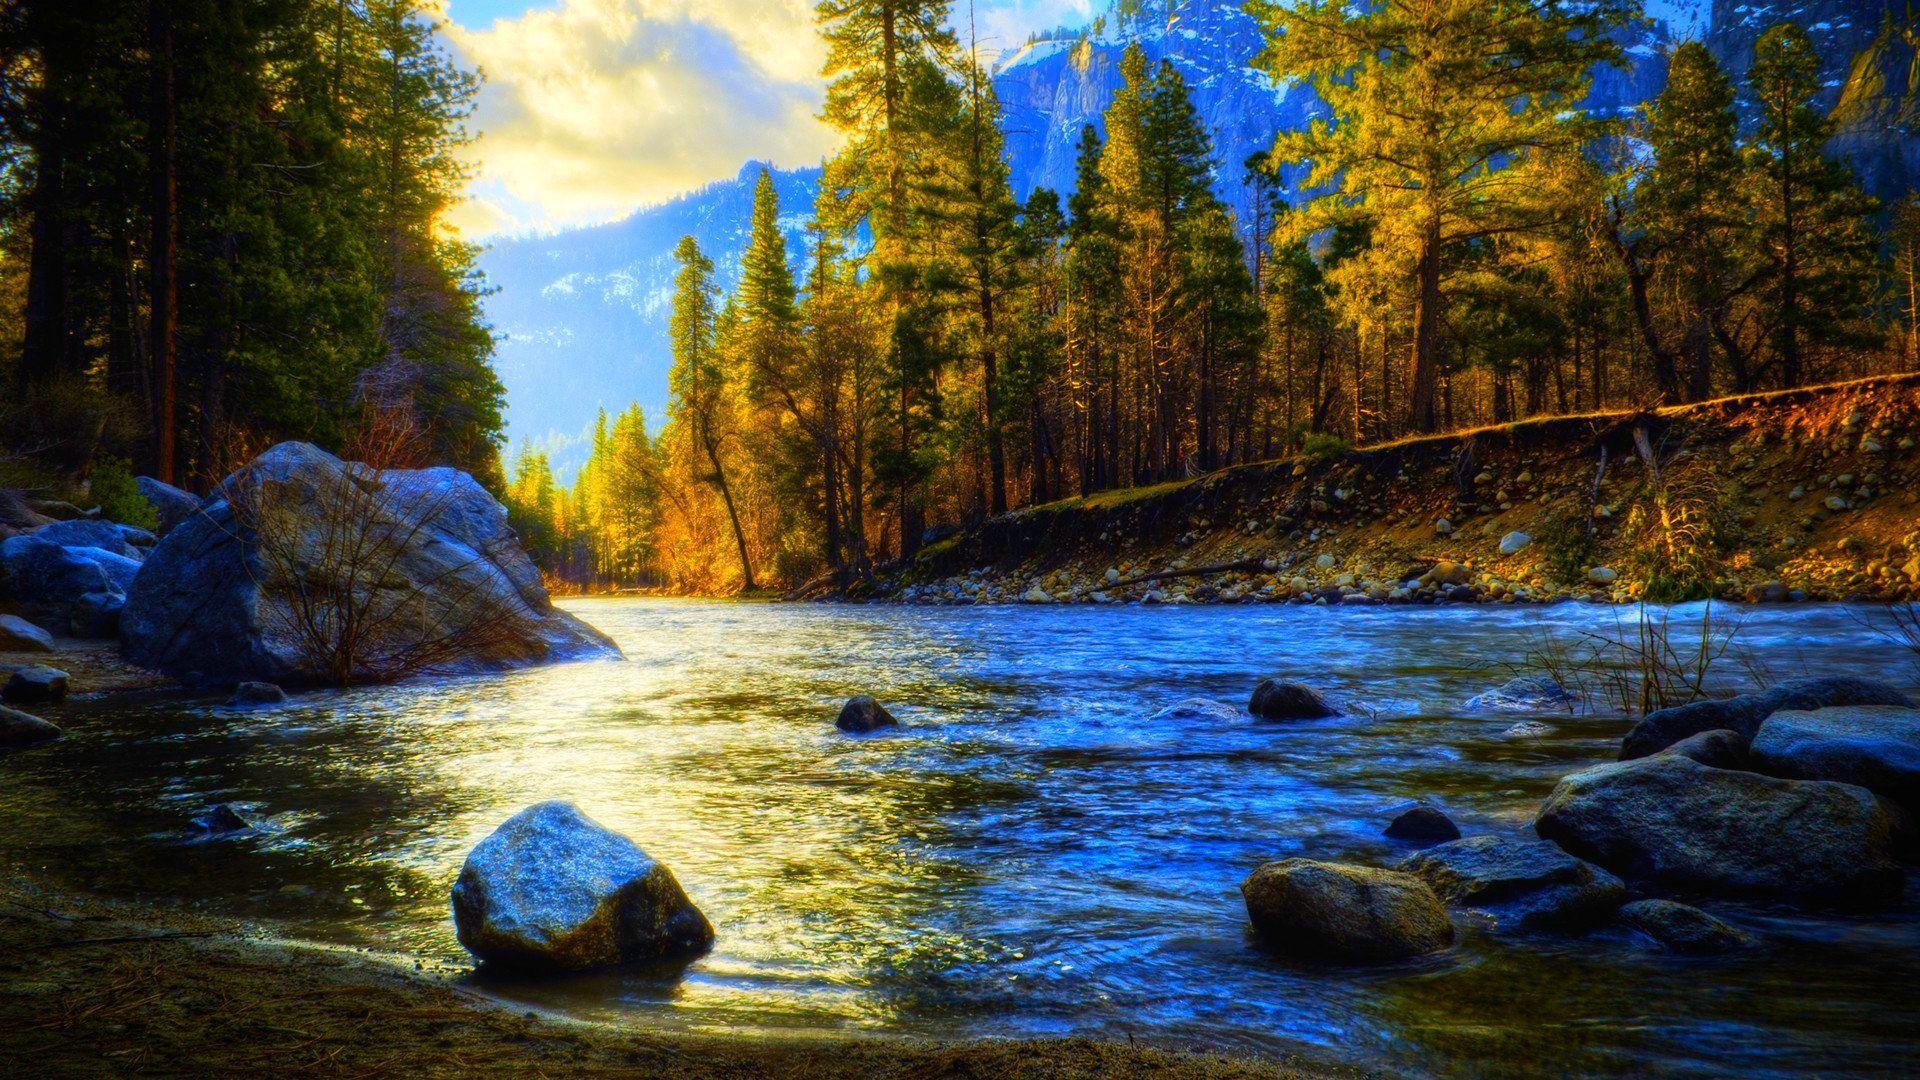 Green trees beside river during daytime photo  Free Water Image on Unsplash